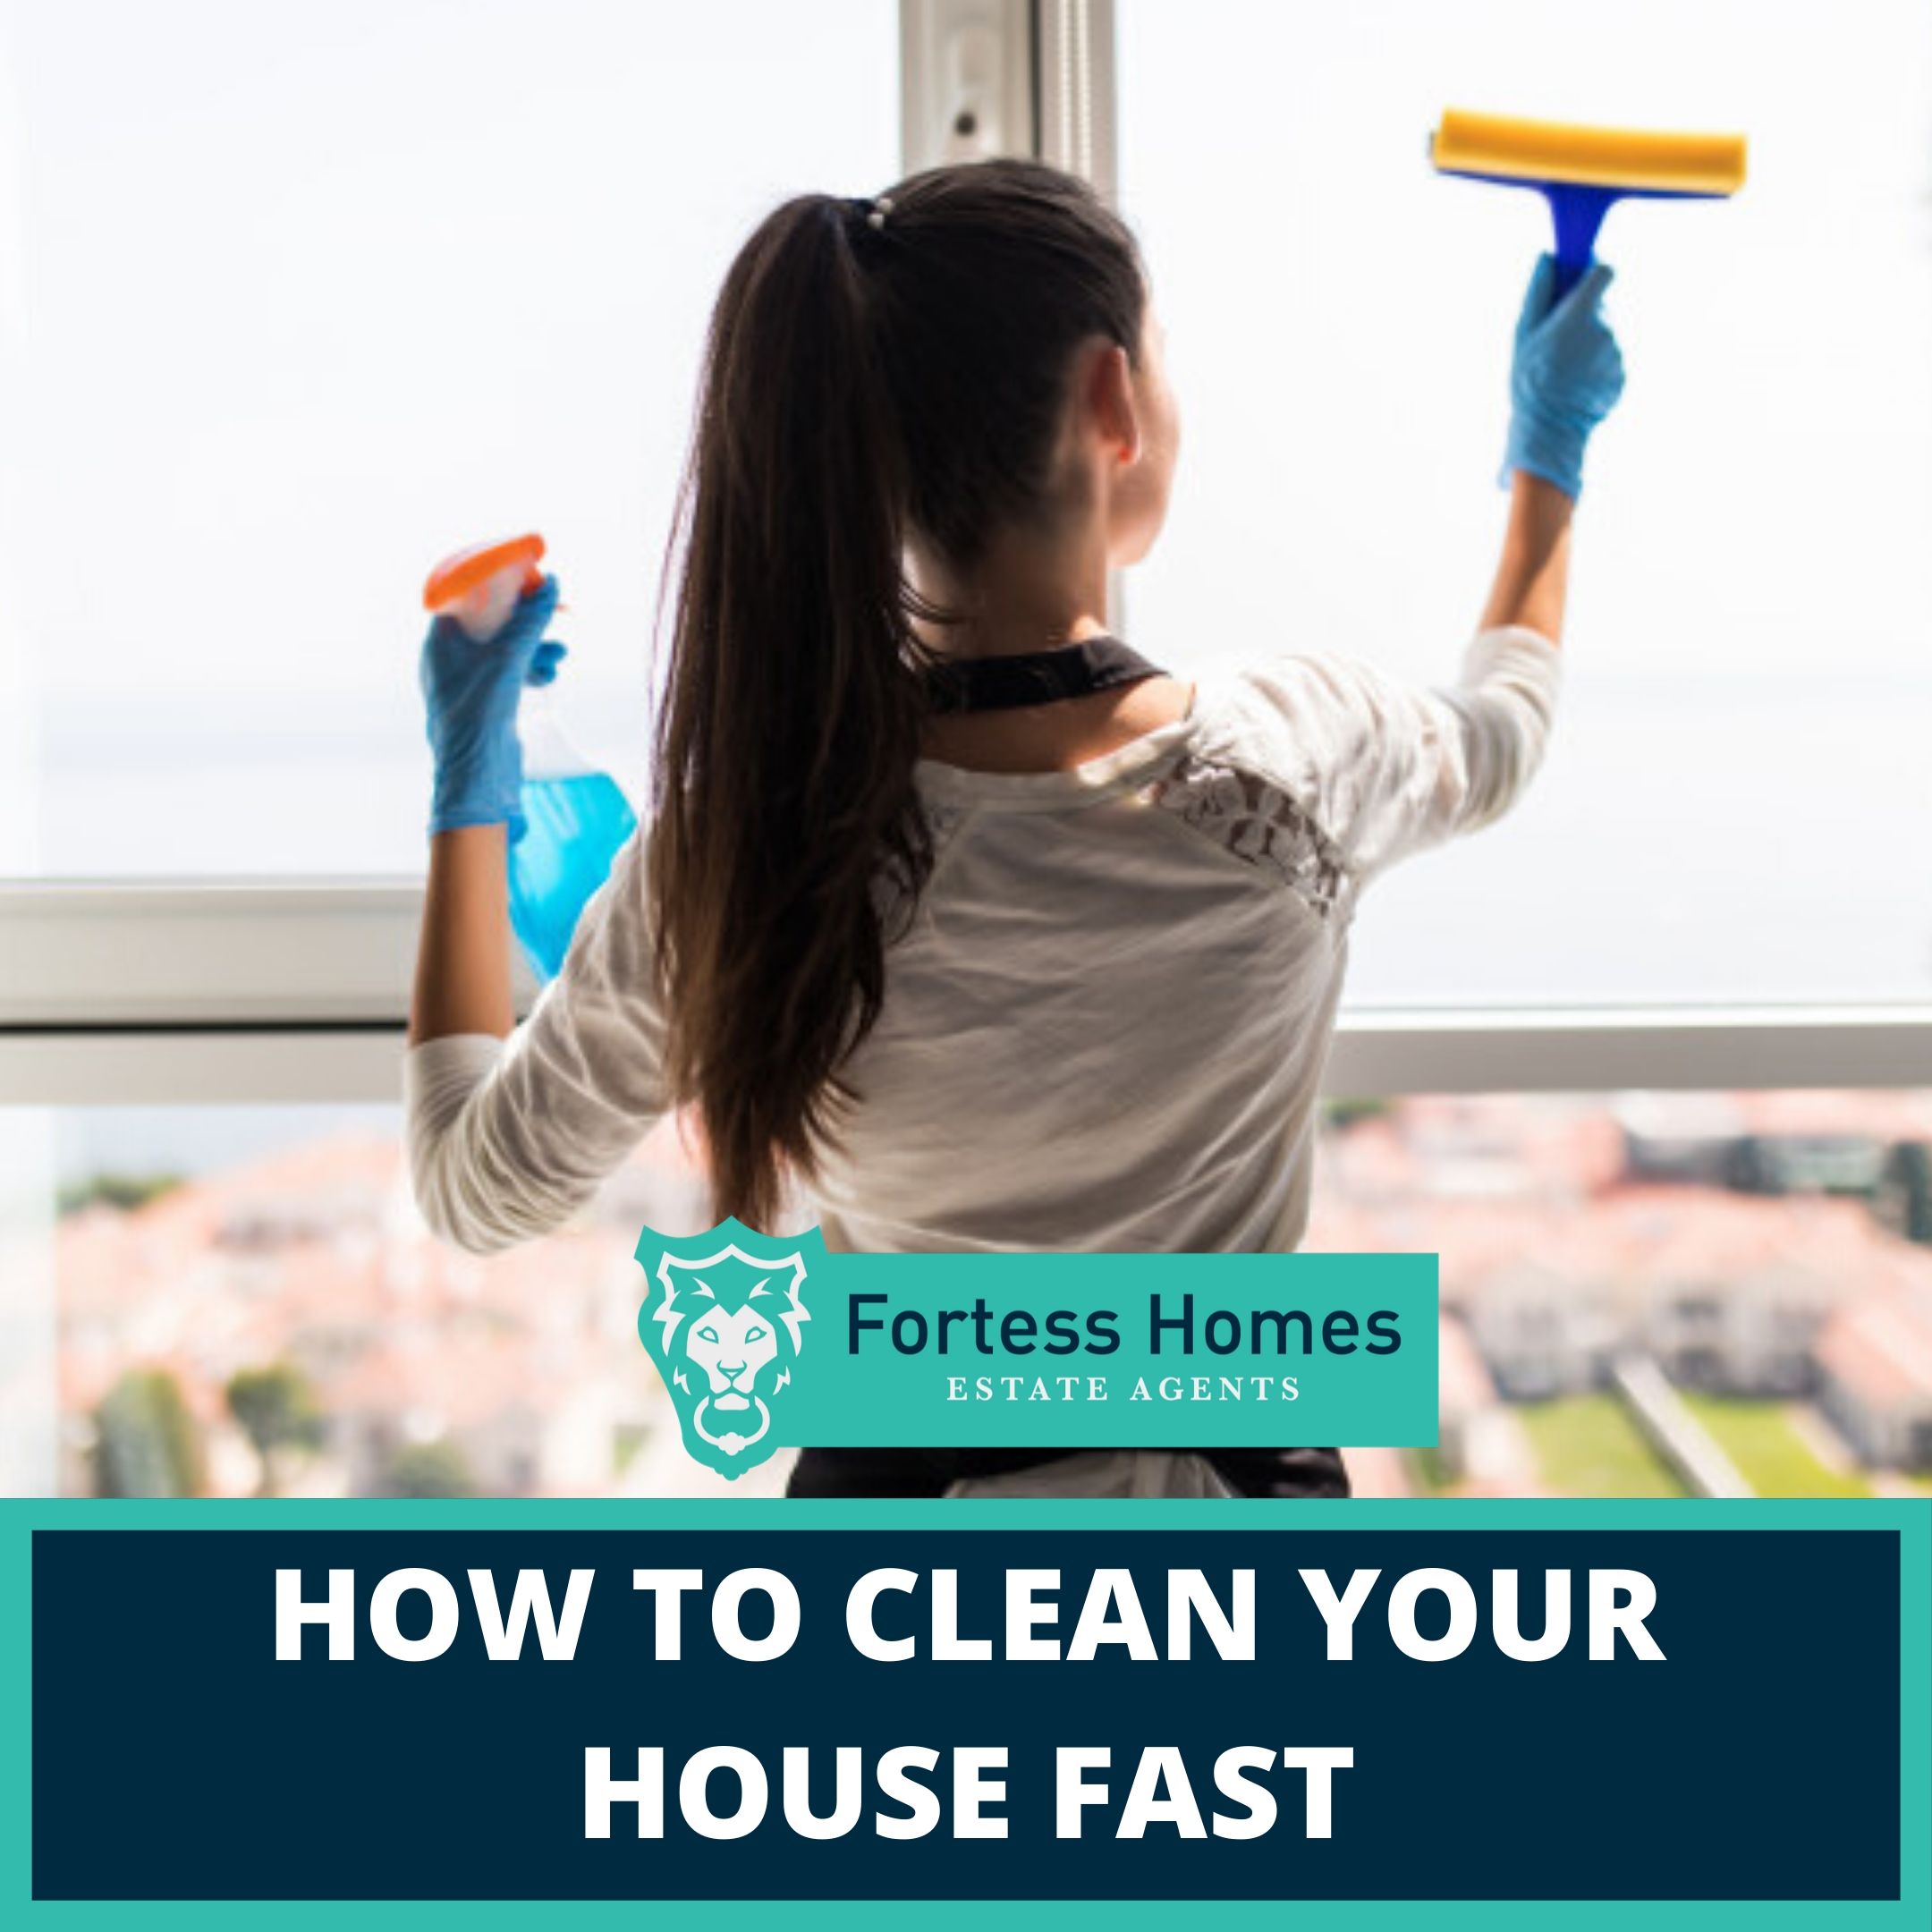 HOW TO CLEAN YOUR HOUSE FAST